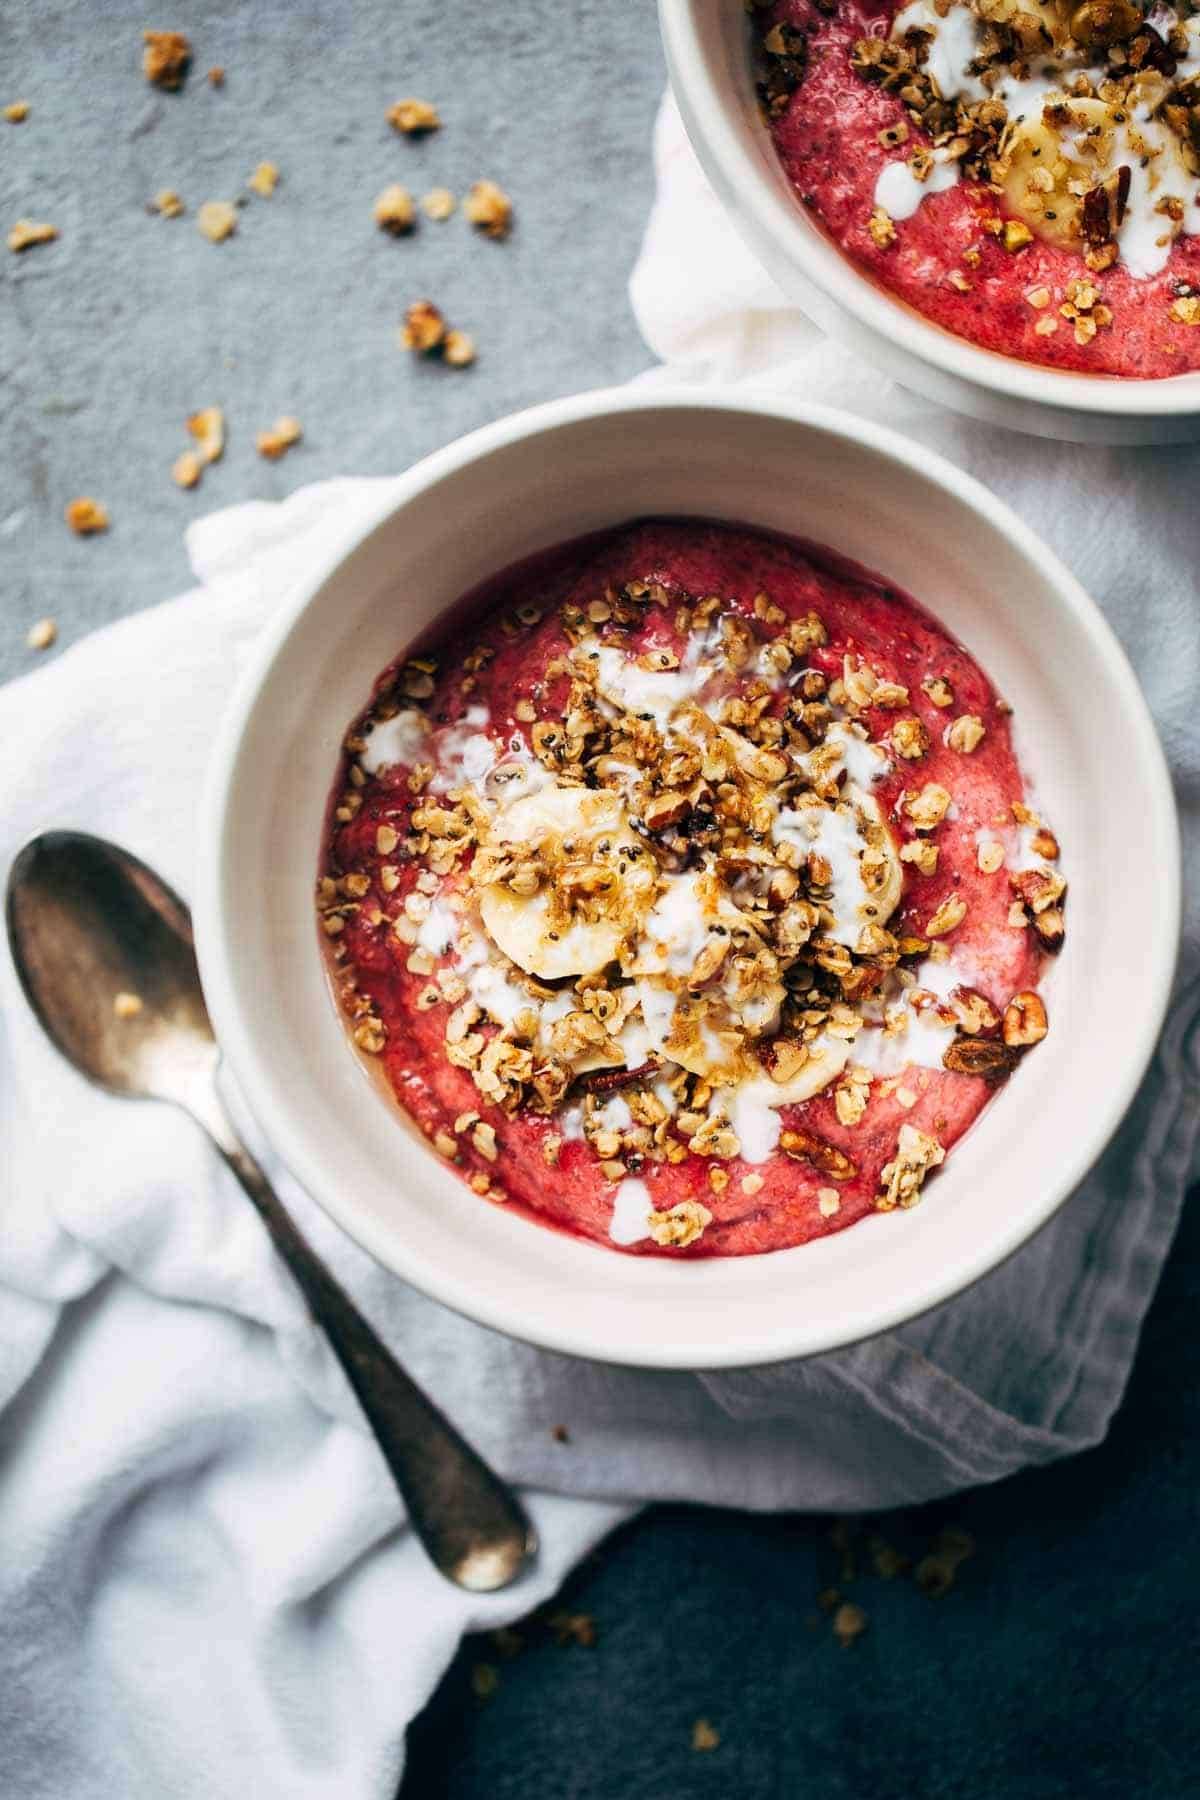 Inner Goddess Raspberry Breakfast Bowls - ready in 20 minutes, loaded with nutrients, perfect for healthy breakfasts on the go!